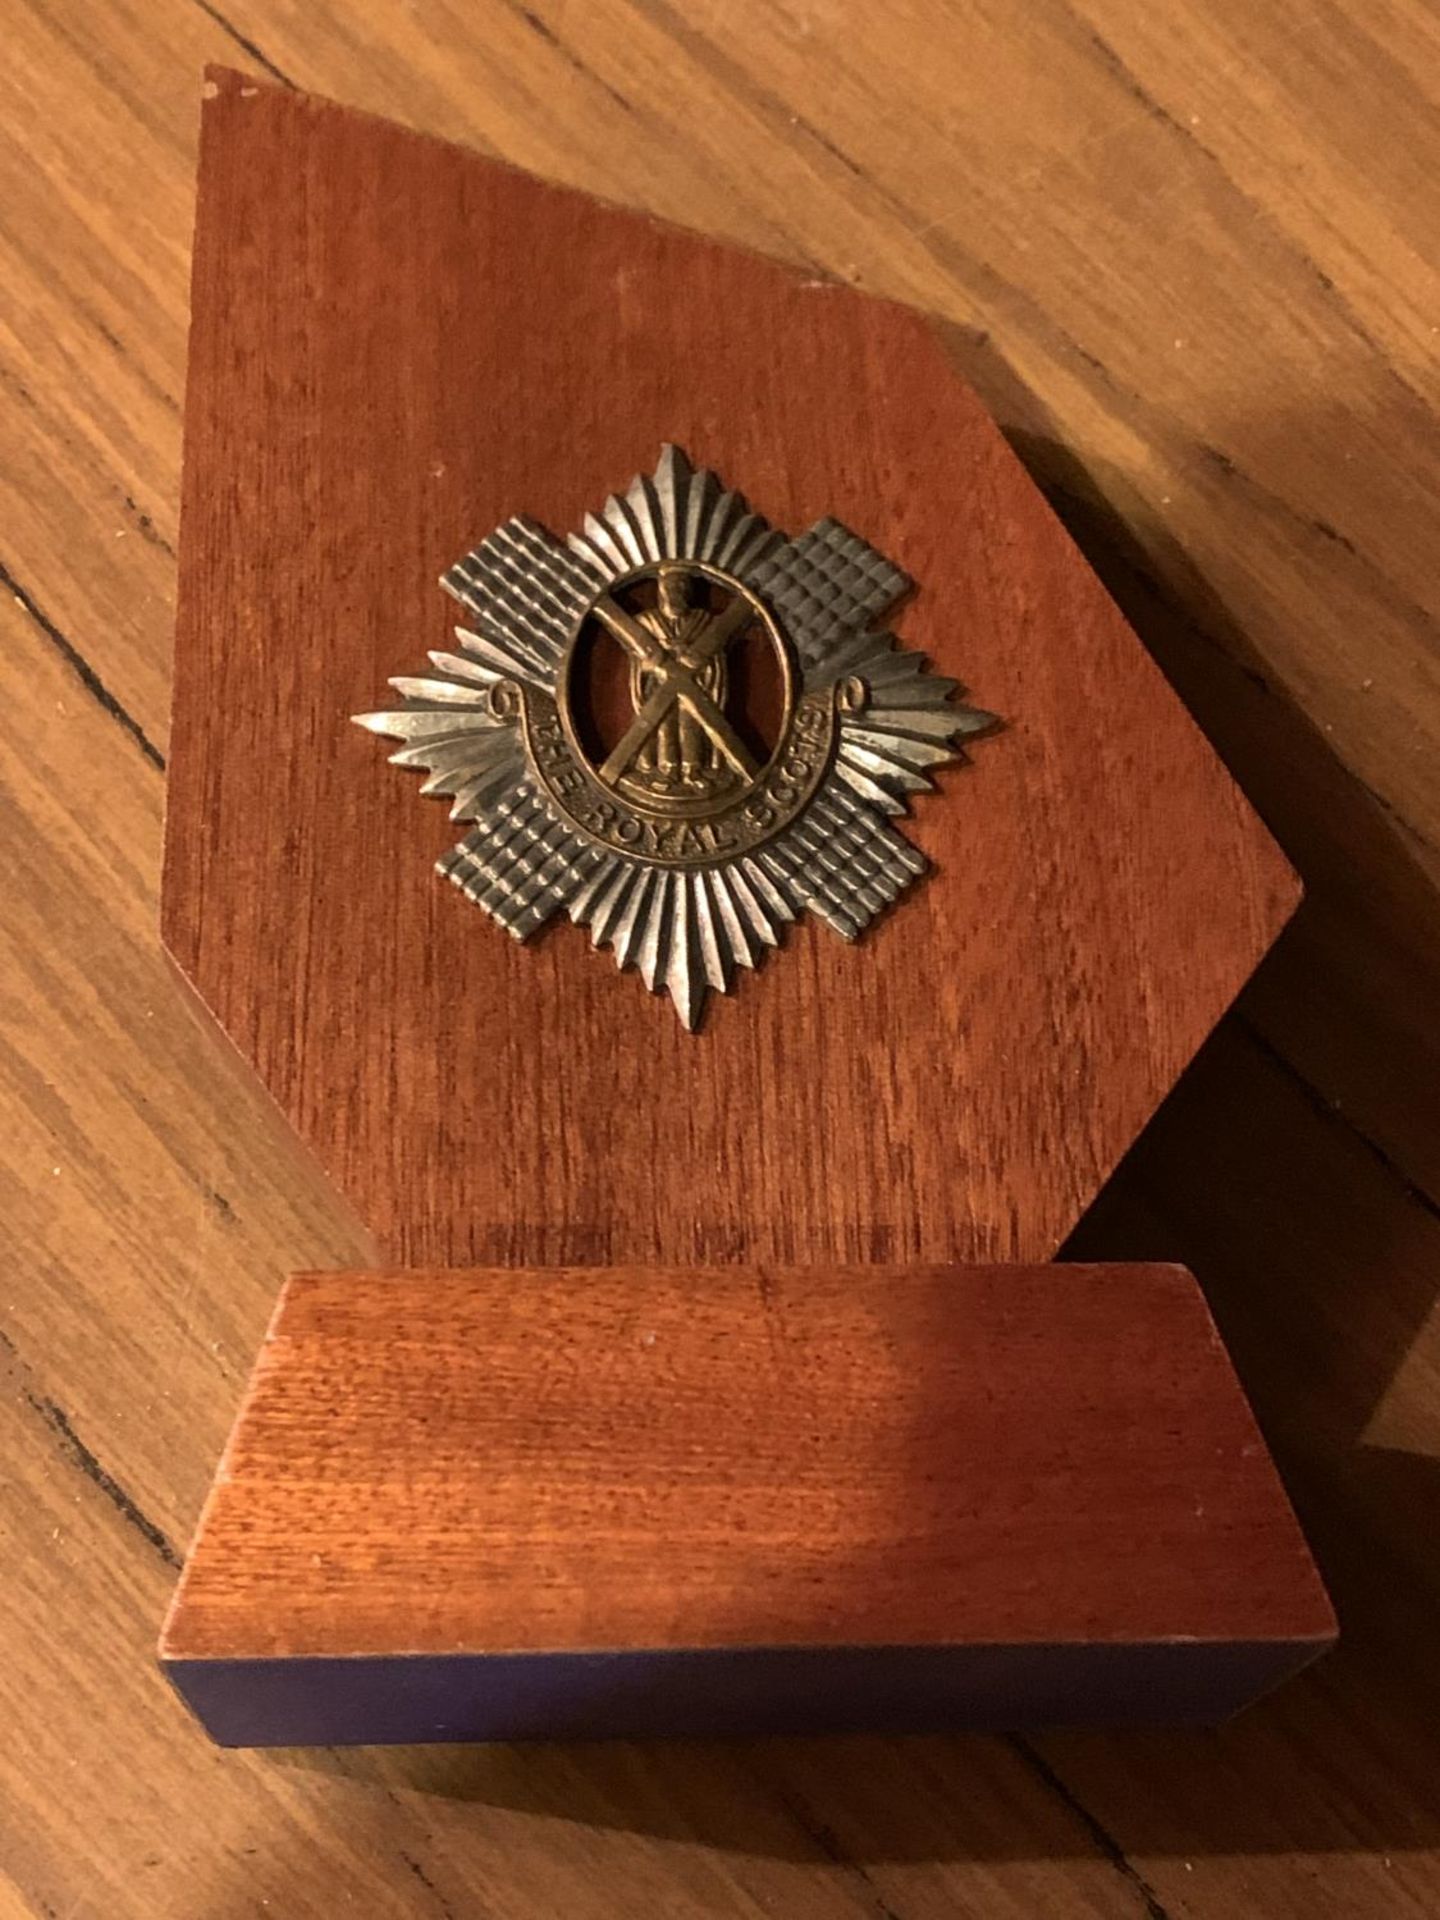 A ROYAL SCOTS BADGE ON A WOODEN MOUNT